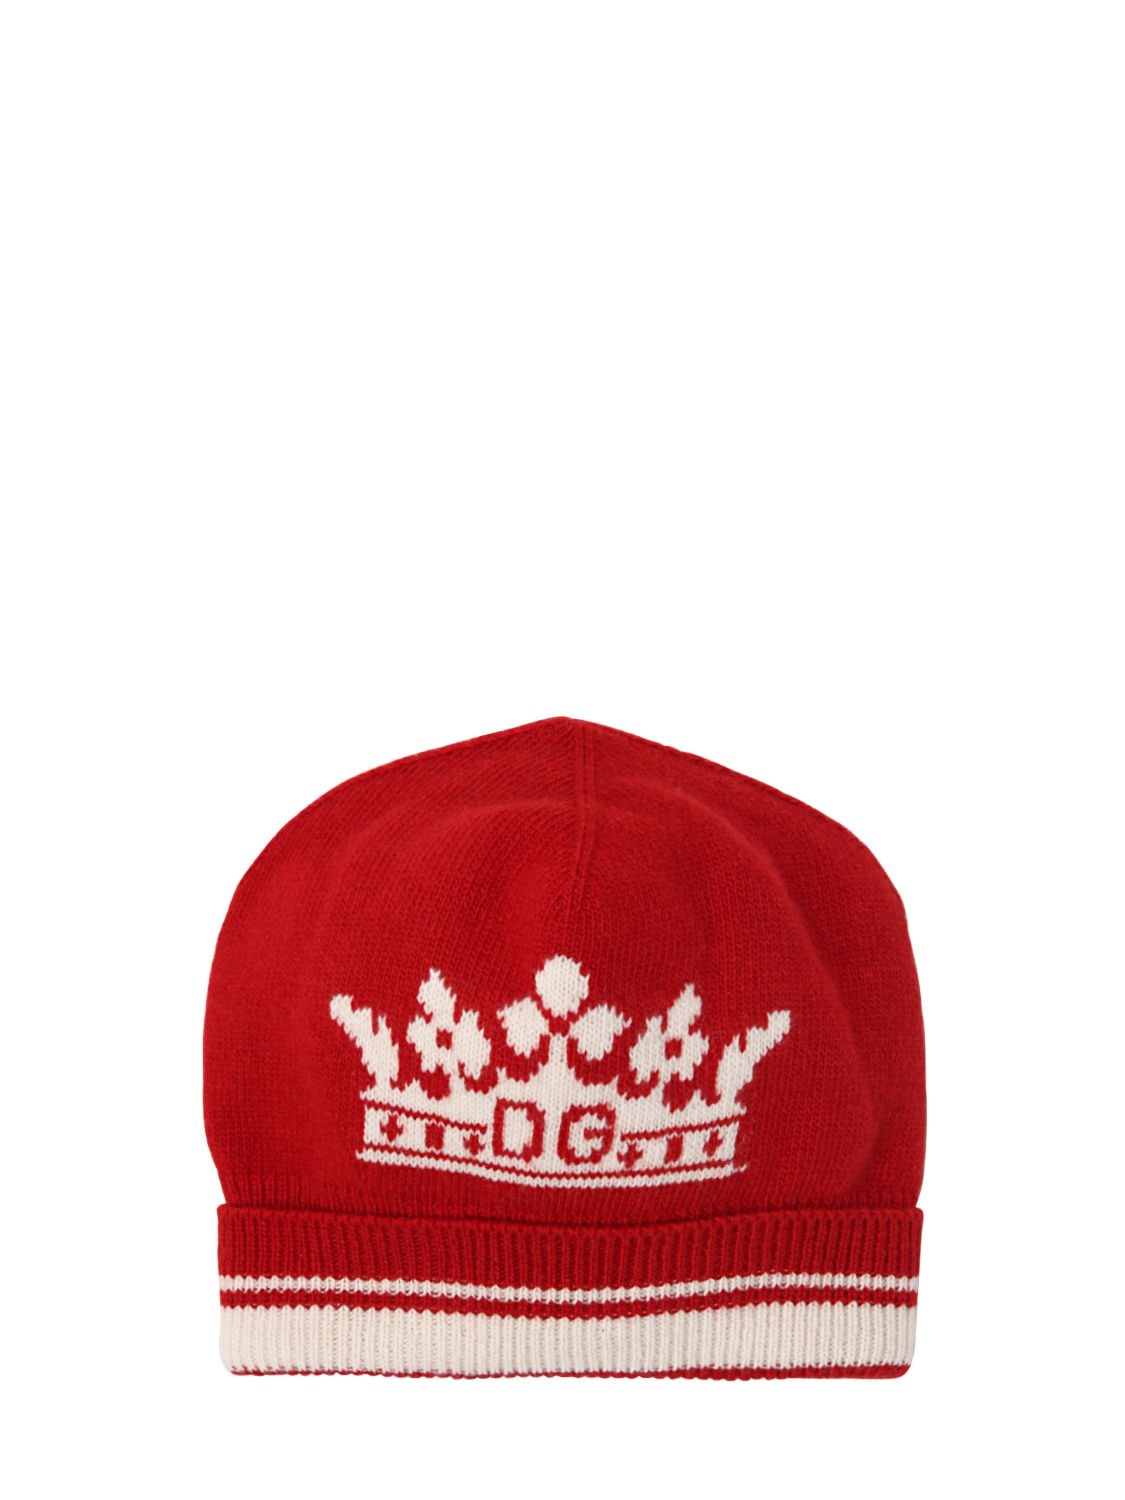 Dolce & Gabbana Babies' Logo Wool & Cashmere Intarsia Knit Hat In Red